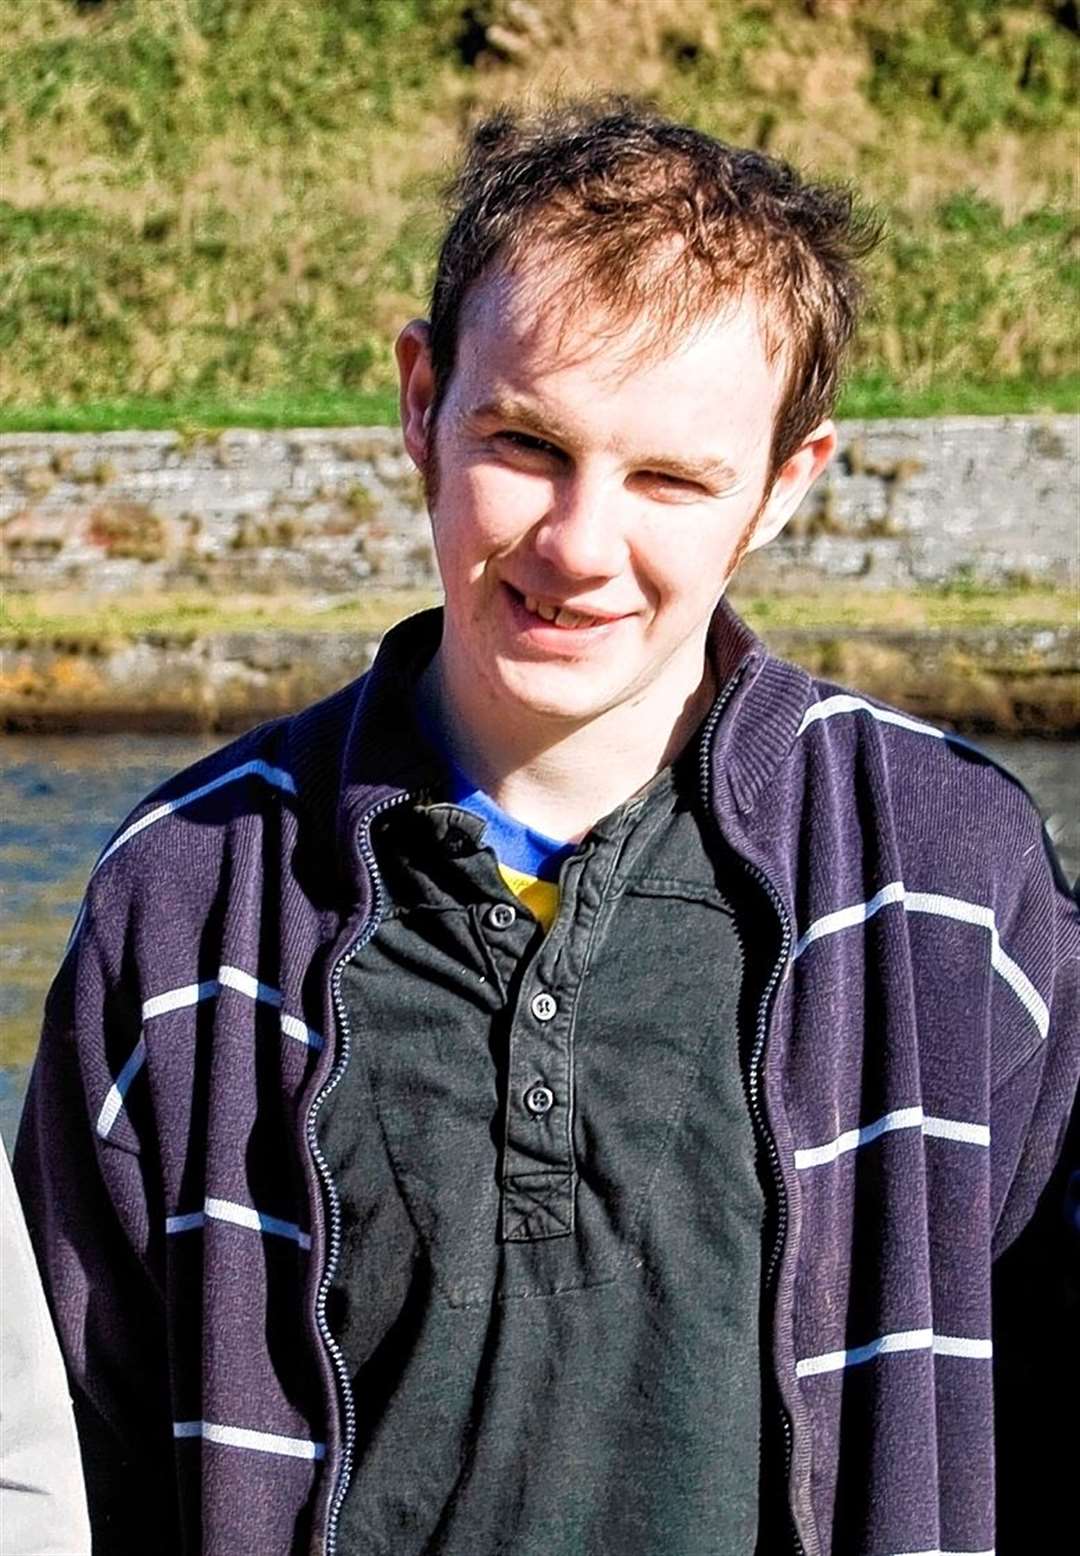 Stefan Sutherland's body was found on the shore near Occumster six years ago.